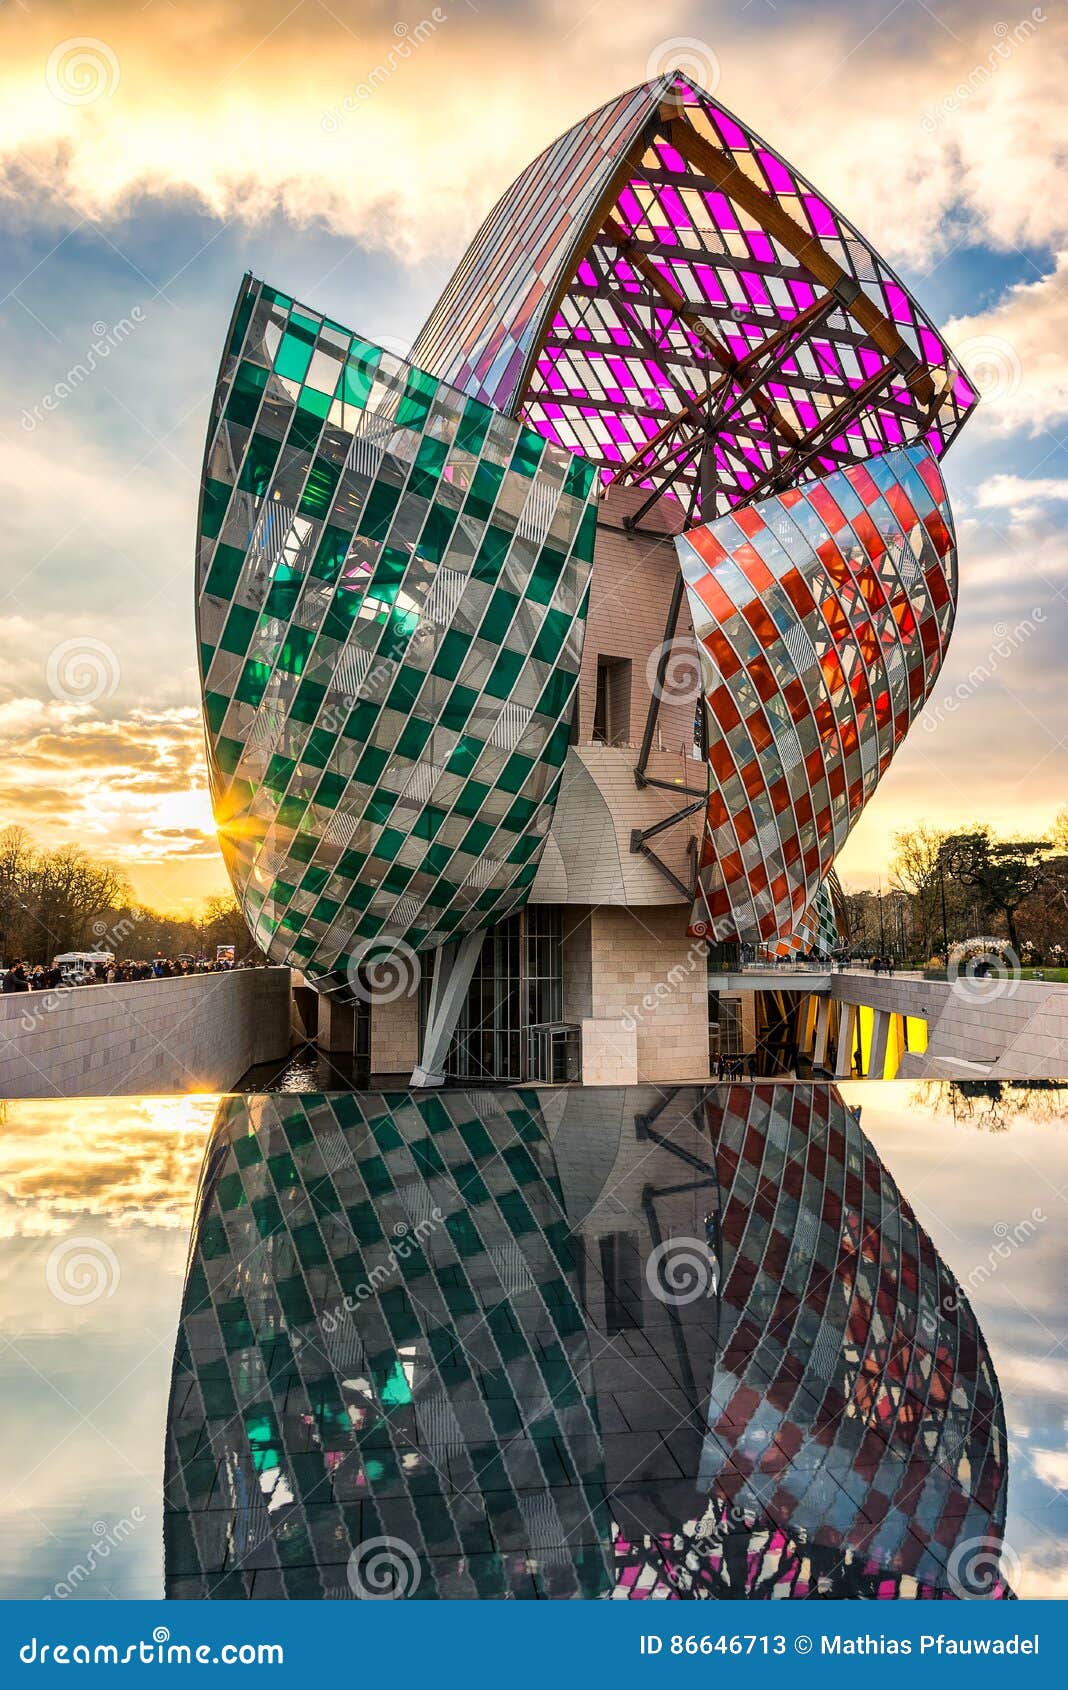 Louis Vuitton Foundation at Sunset Editorial Stock Photo - Image